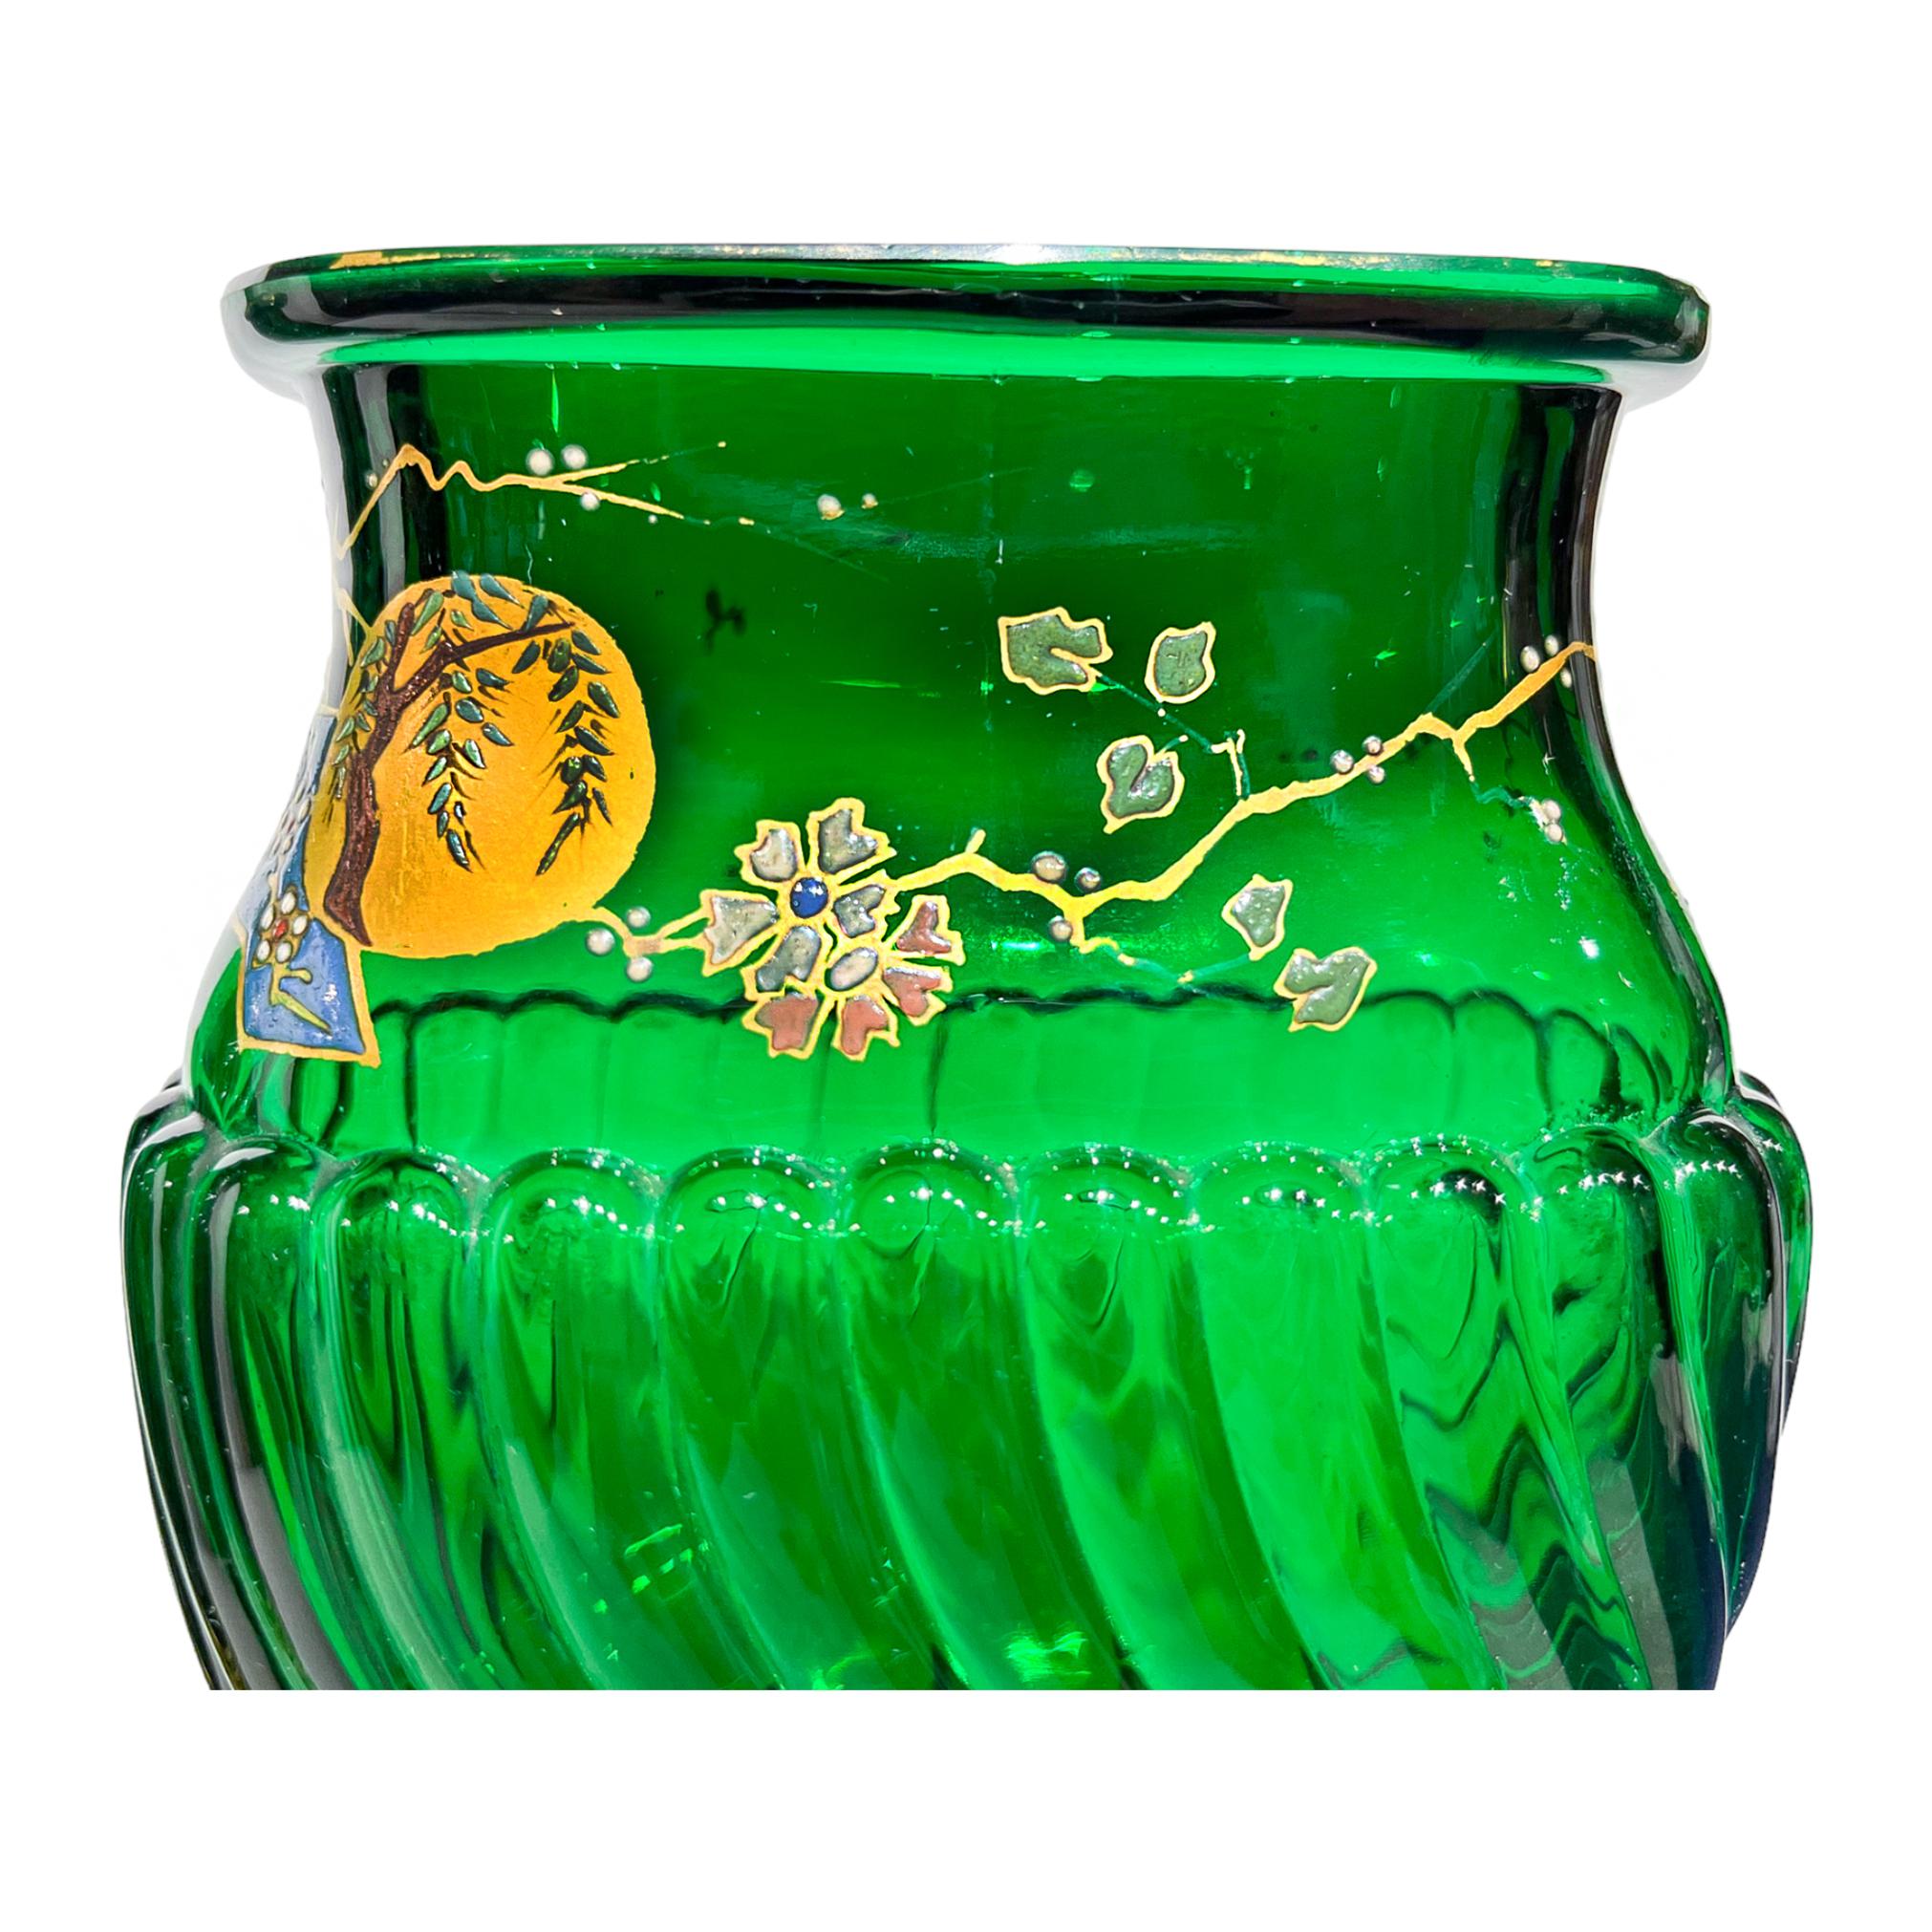 Baccarat Emerald Green Pair of Japonisme Vases with Enamel Sakura Tree and Sun  In Good Condition For Sale In New York, NY